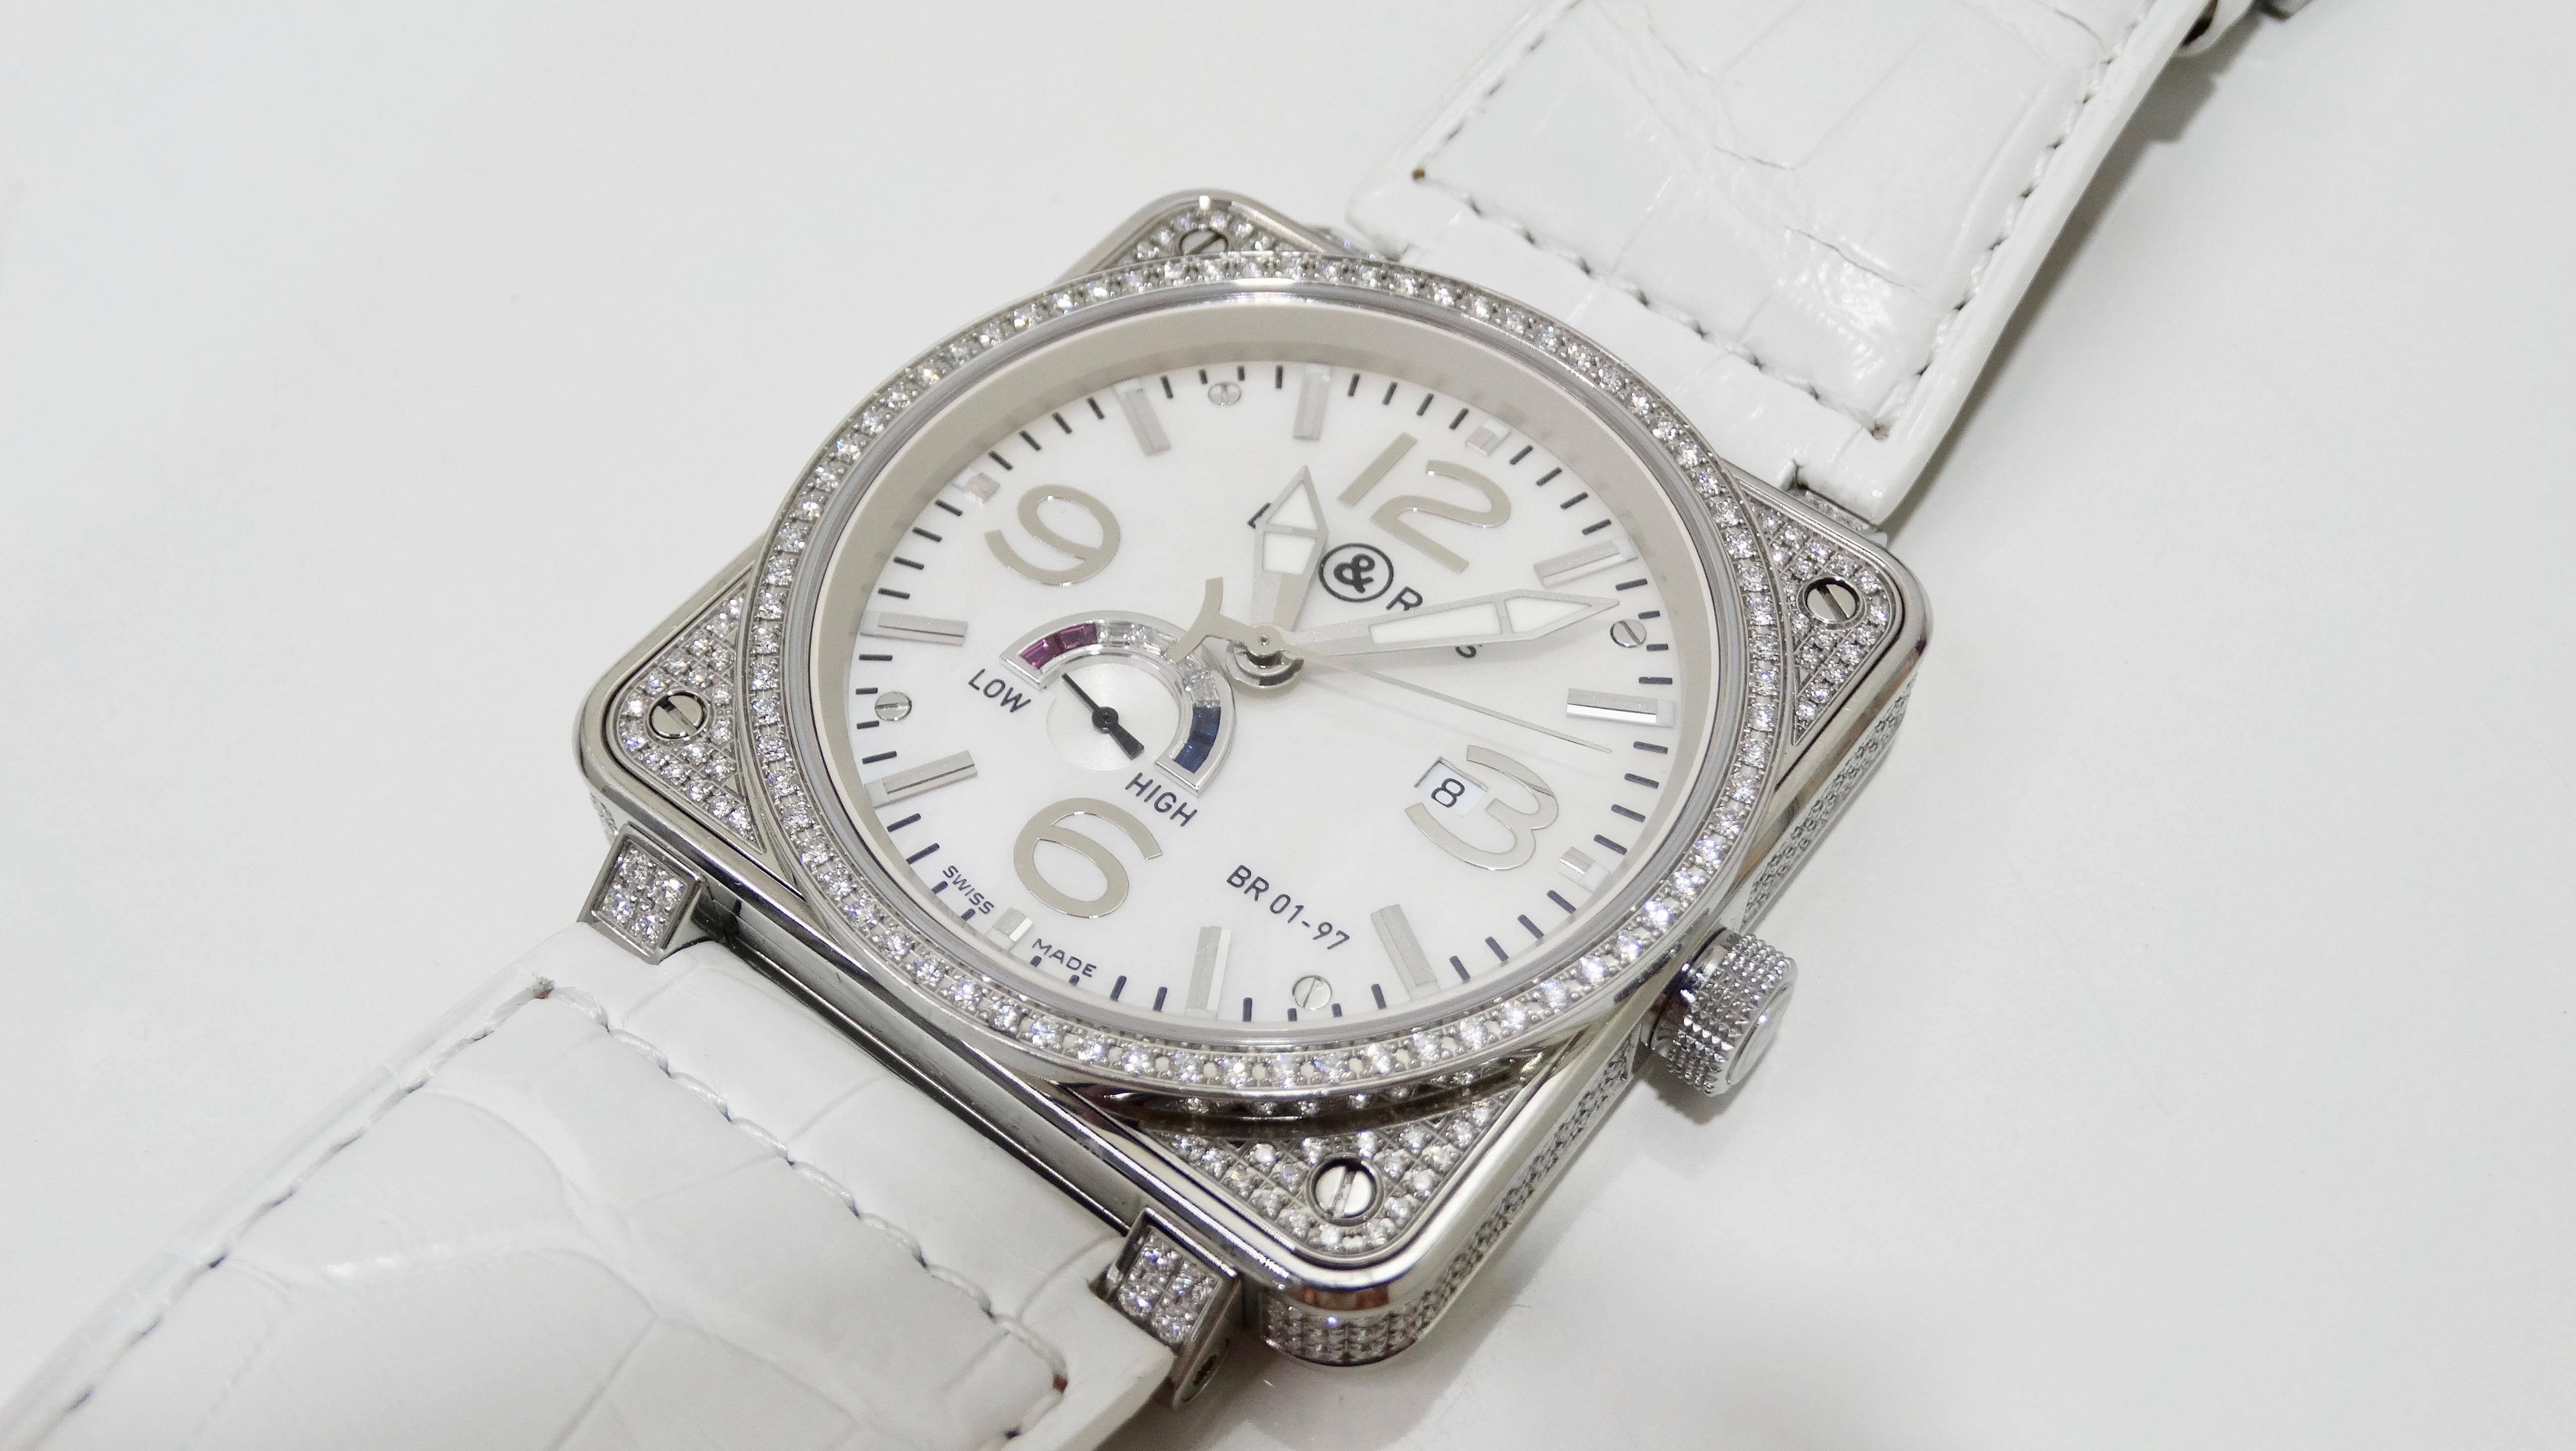 The watch of your dreams is here! Designed by Bell & Ross, this rare BR 01-97 Power Reserve wrist watch is Swiss made and features a 46mm square stainless steel case fully encrusted with 316 3.34ctw diamonds, a Mother of Pearl dial, an